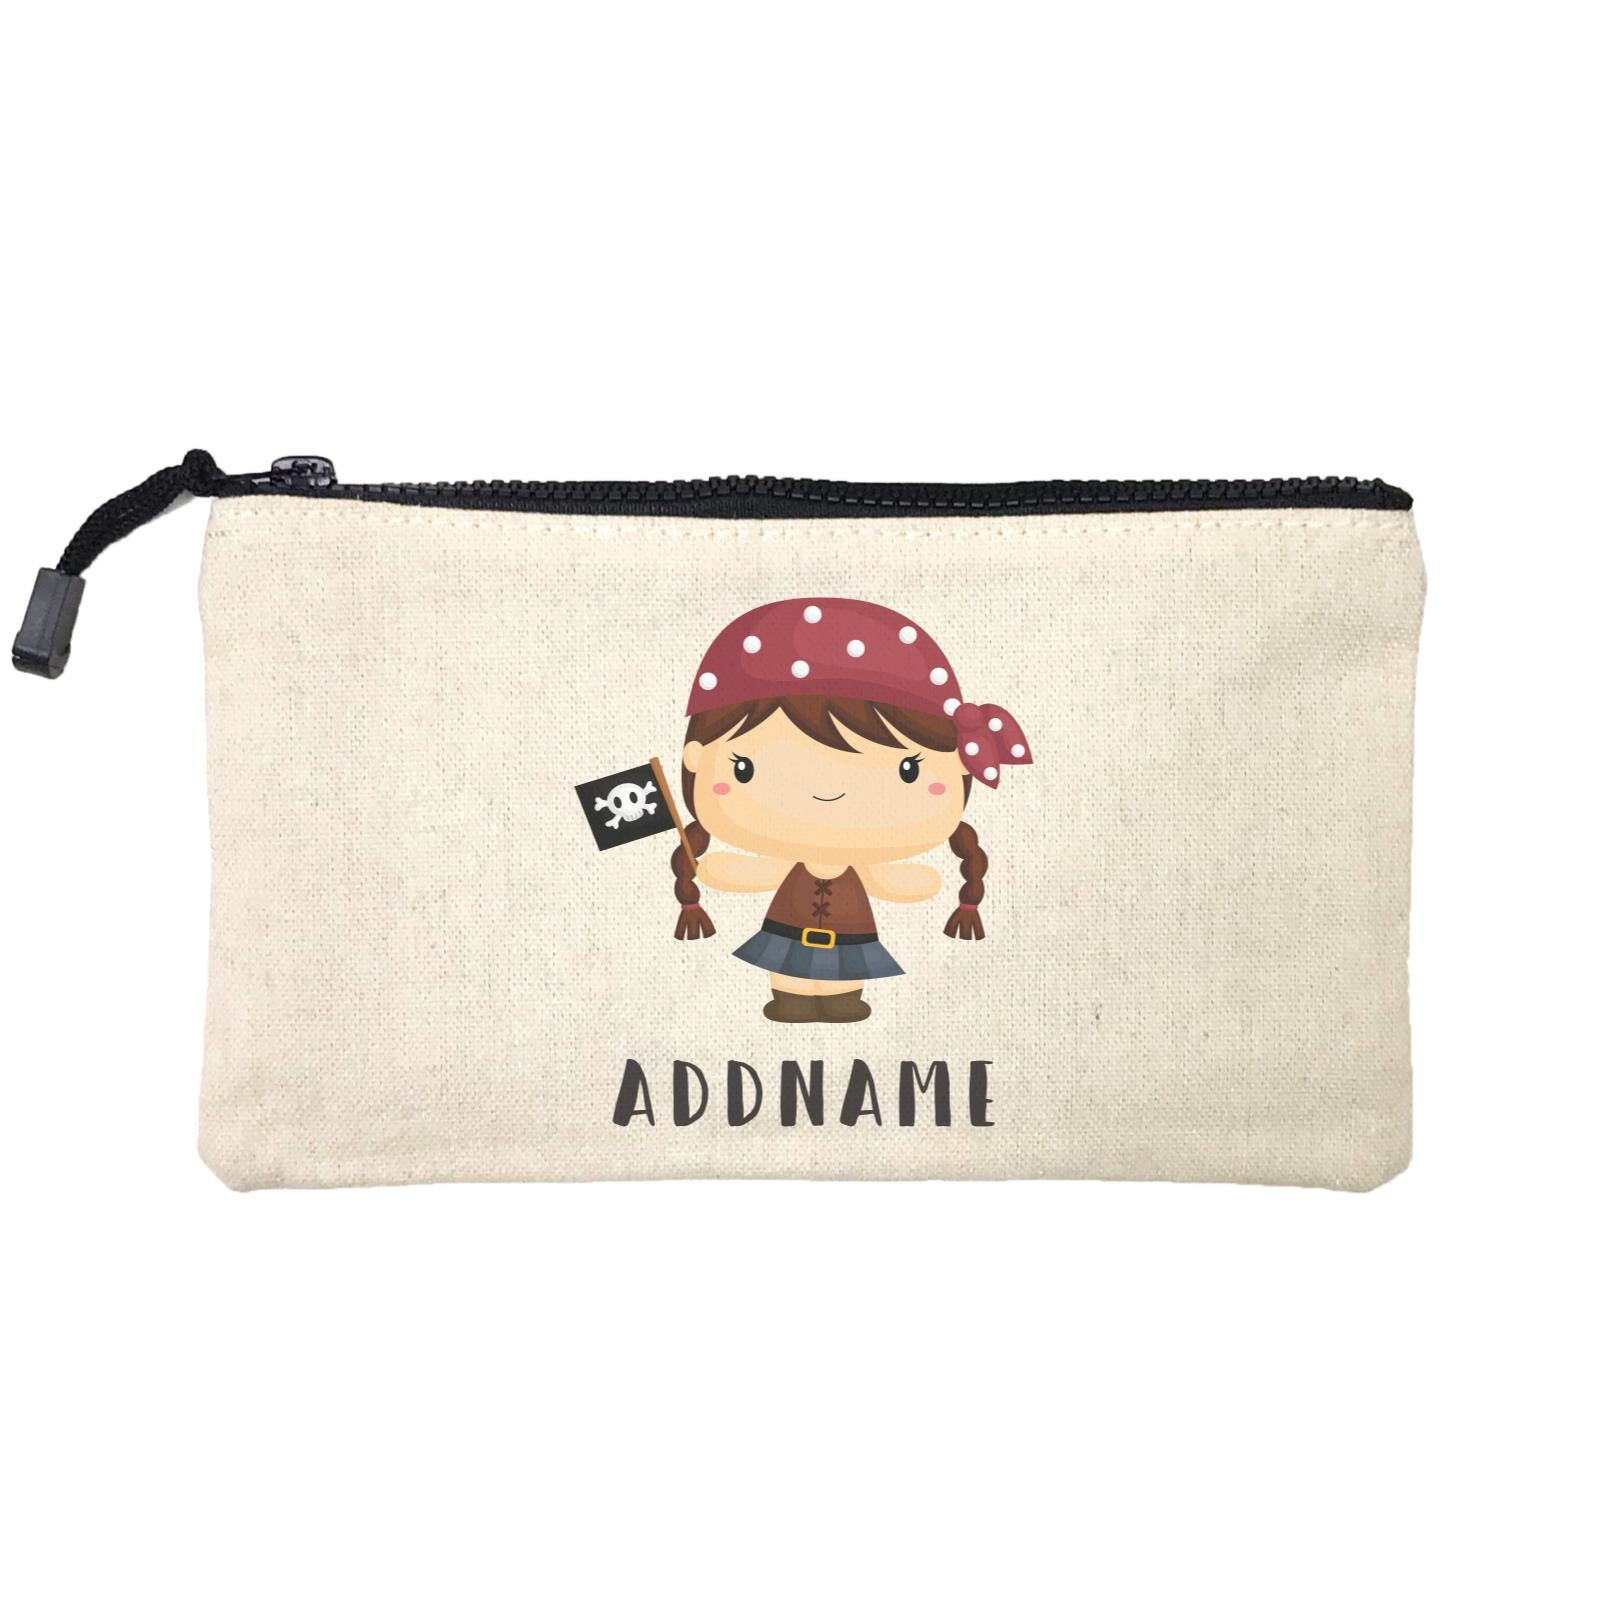 Birthday Pirate Girl Crew Holding Pirate Flag Addname Mini Accessories Stationery Pouch